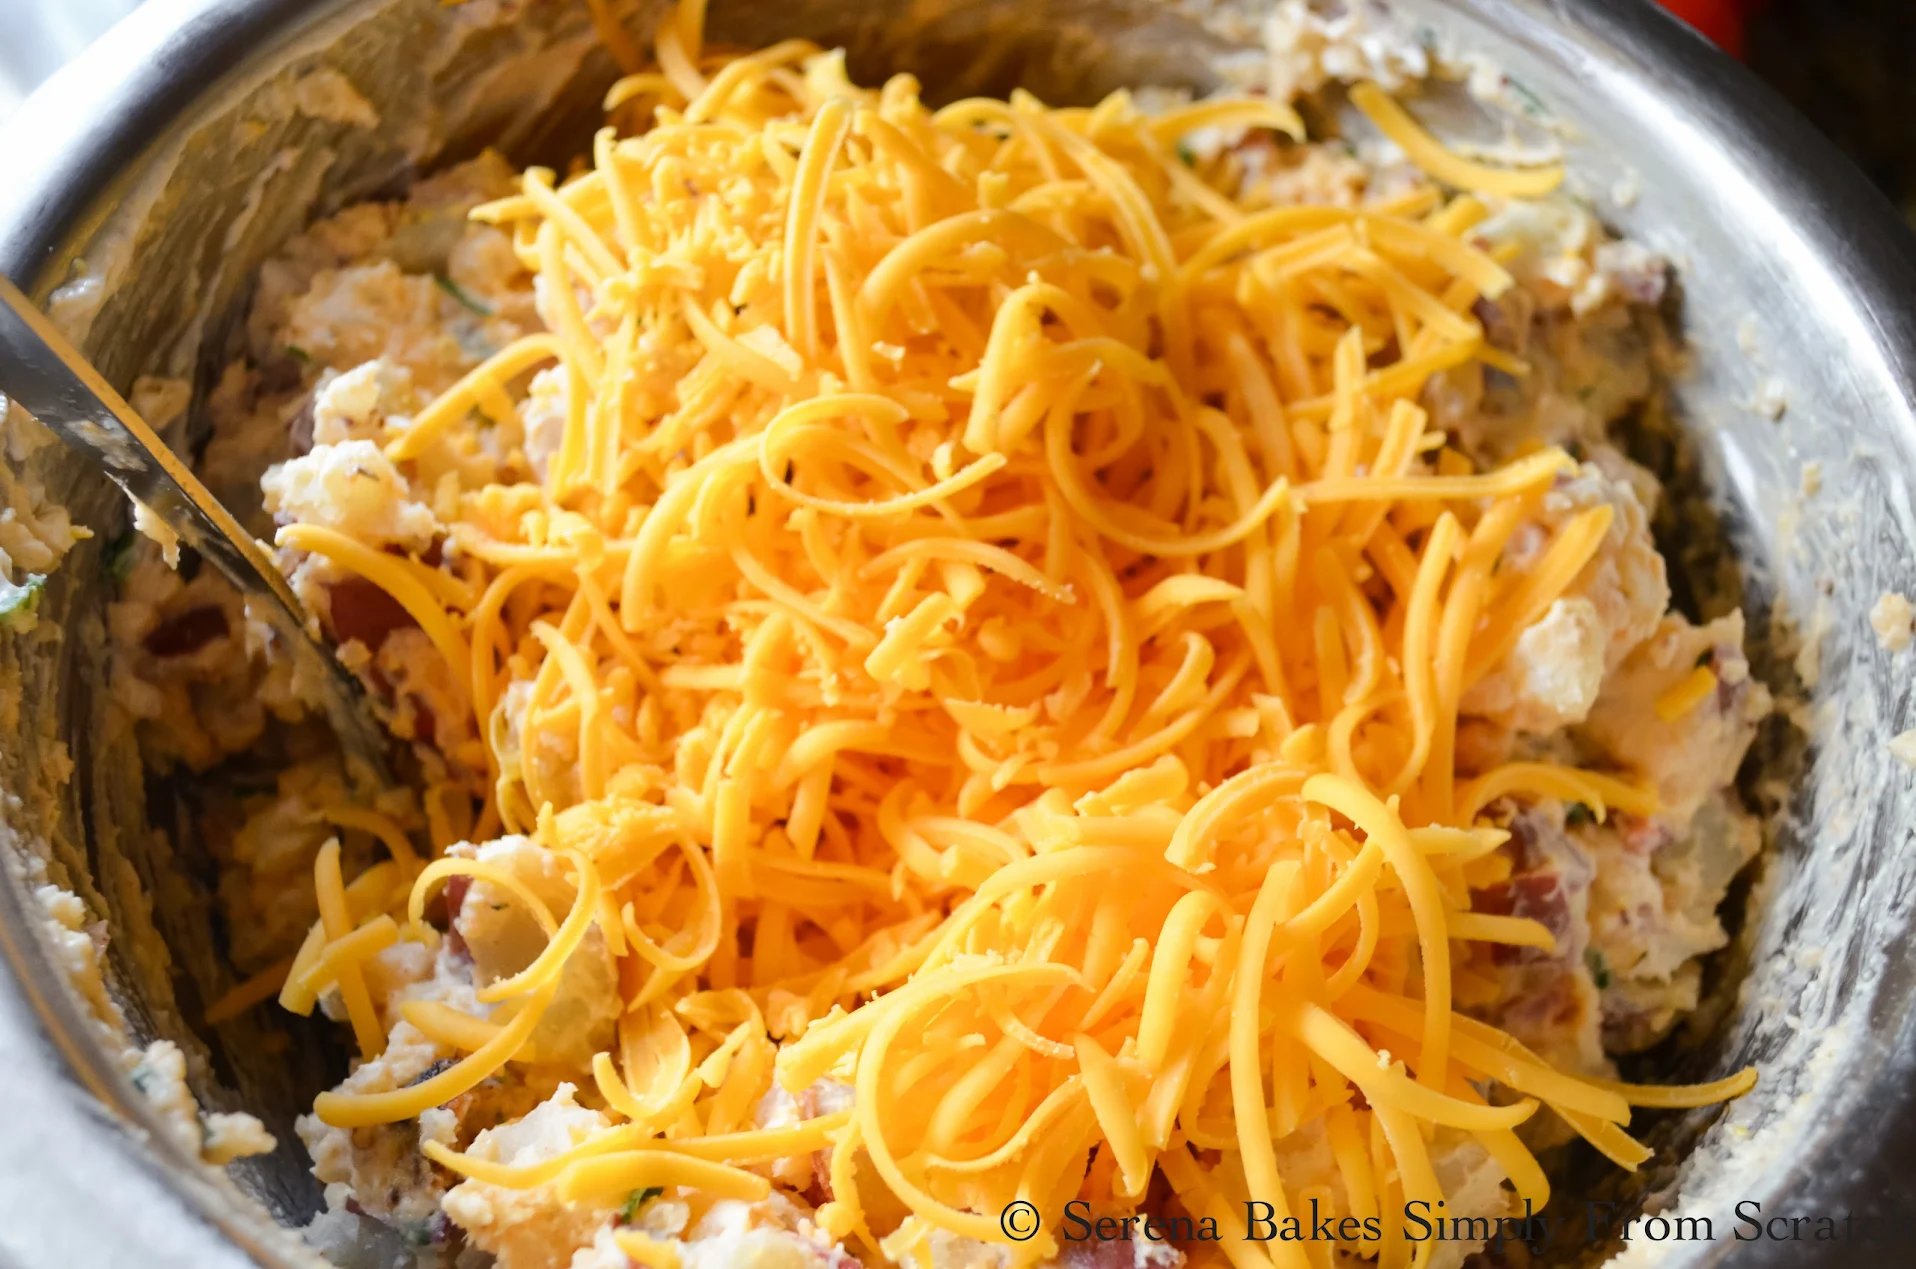 Shredded Cheddar Cheese added to Baked Potato Salad in a stainless steel bowl.